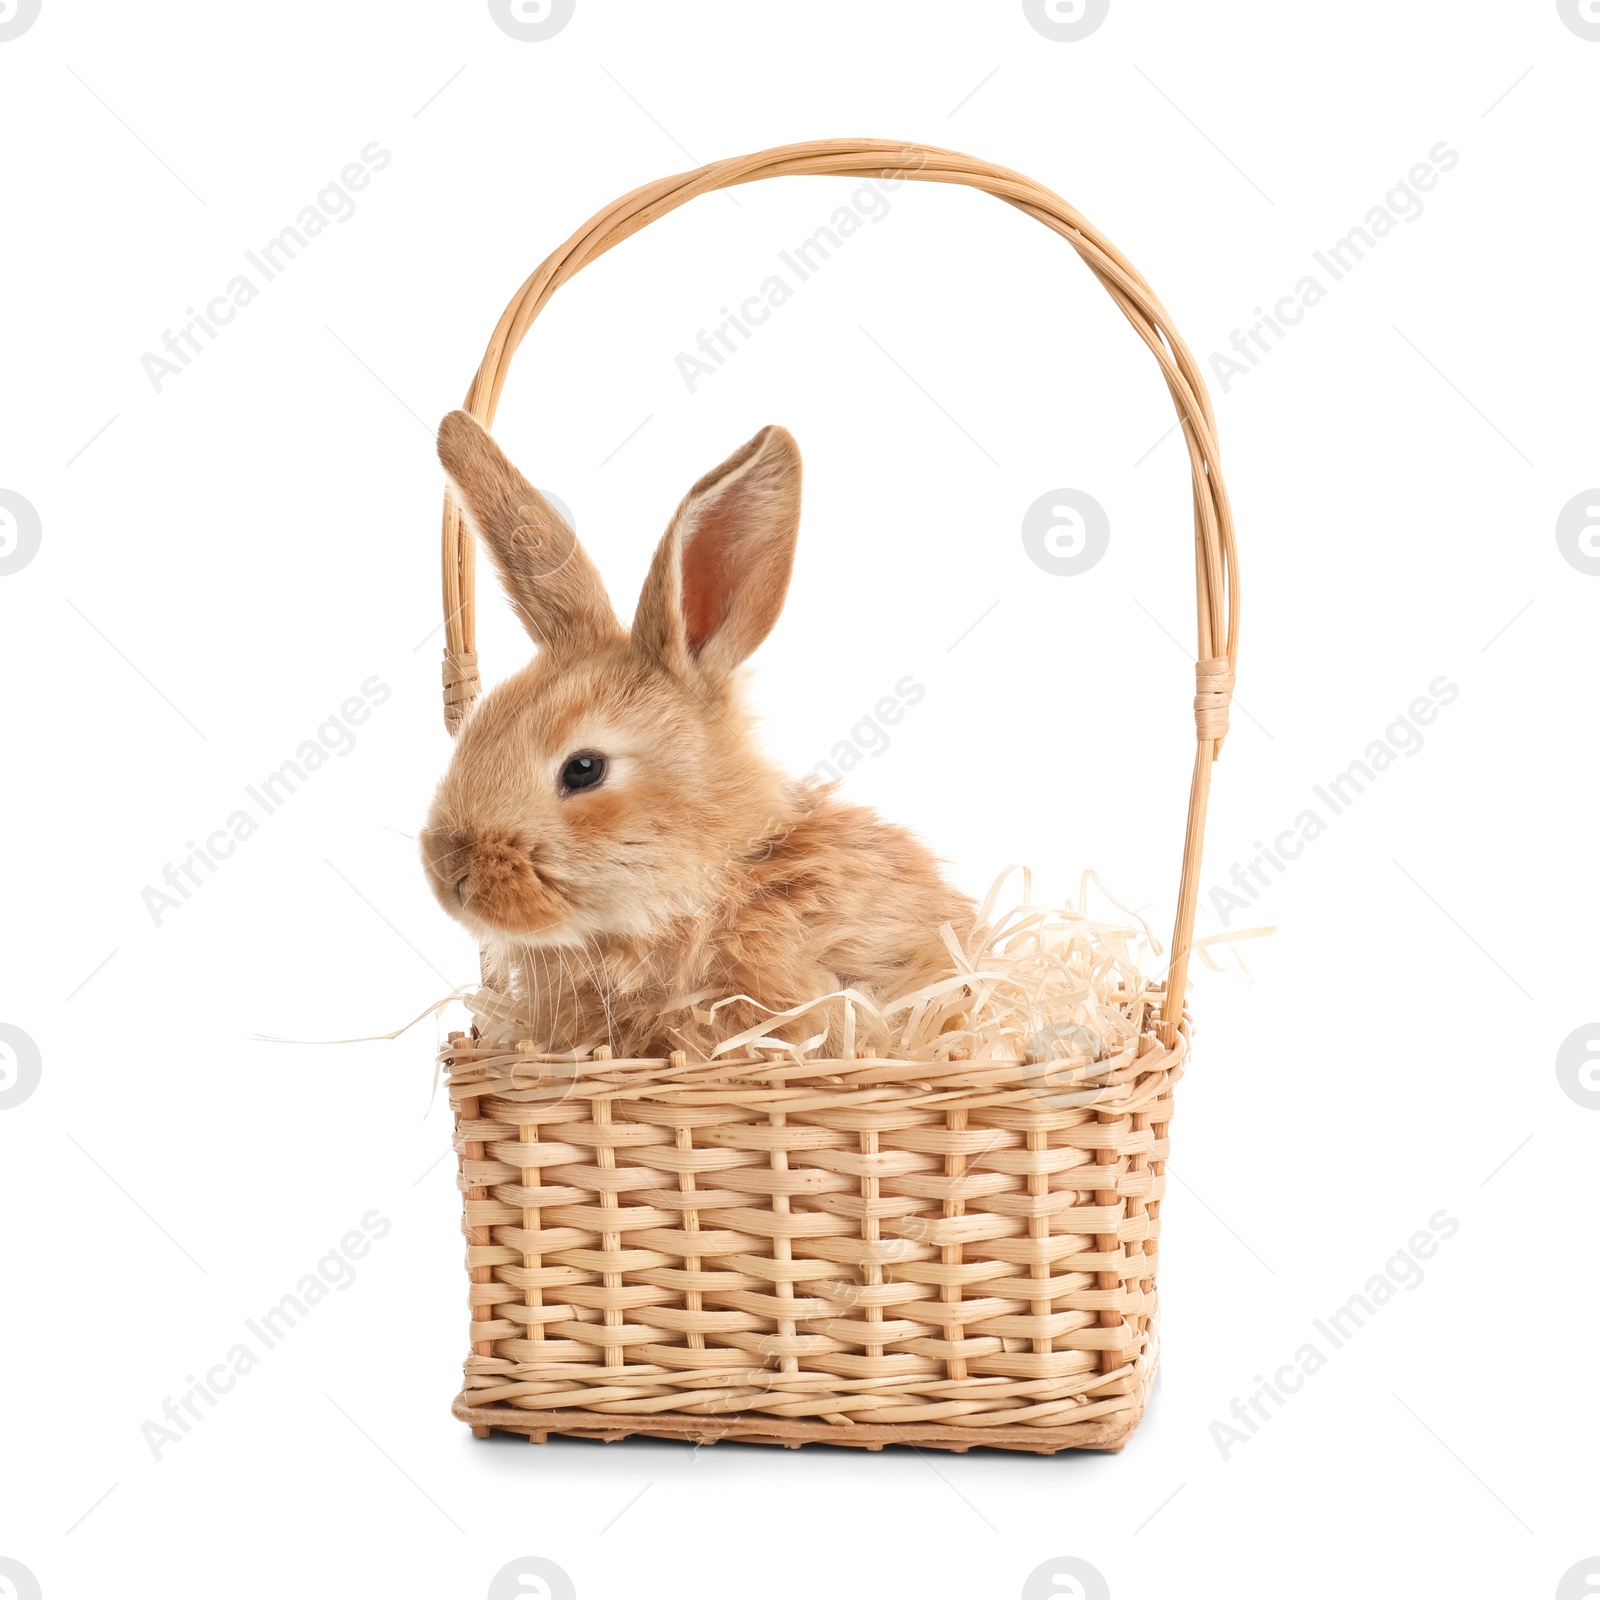 Photo of Adorable furry Easter bunny in wicker basket on white background